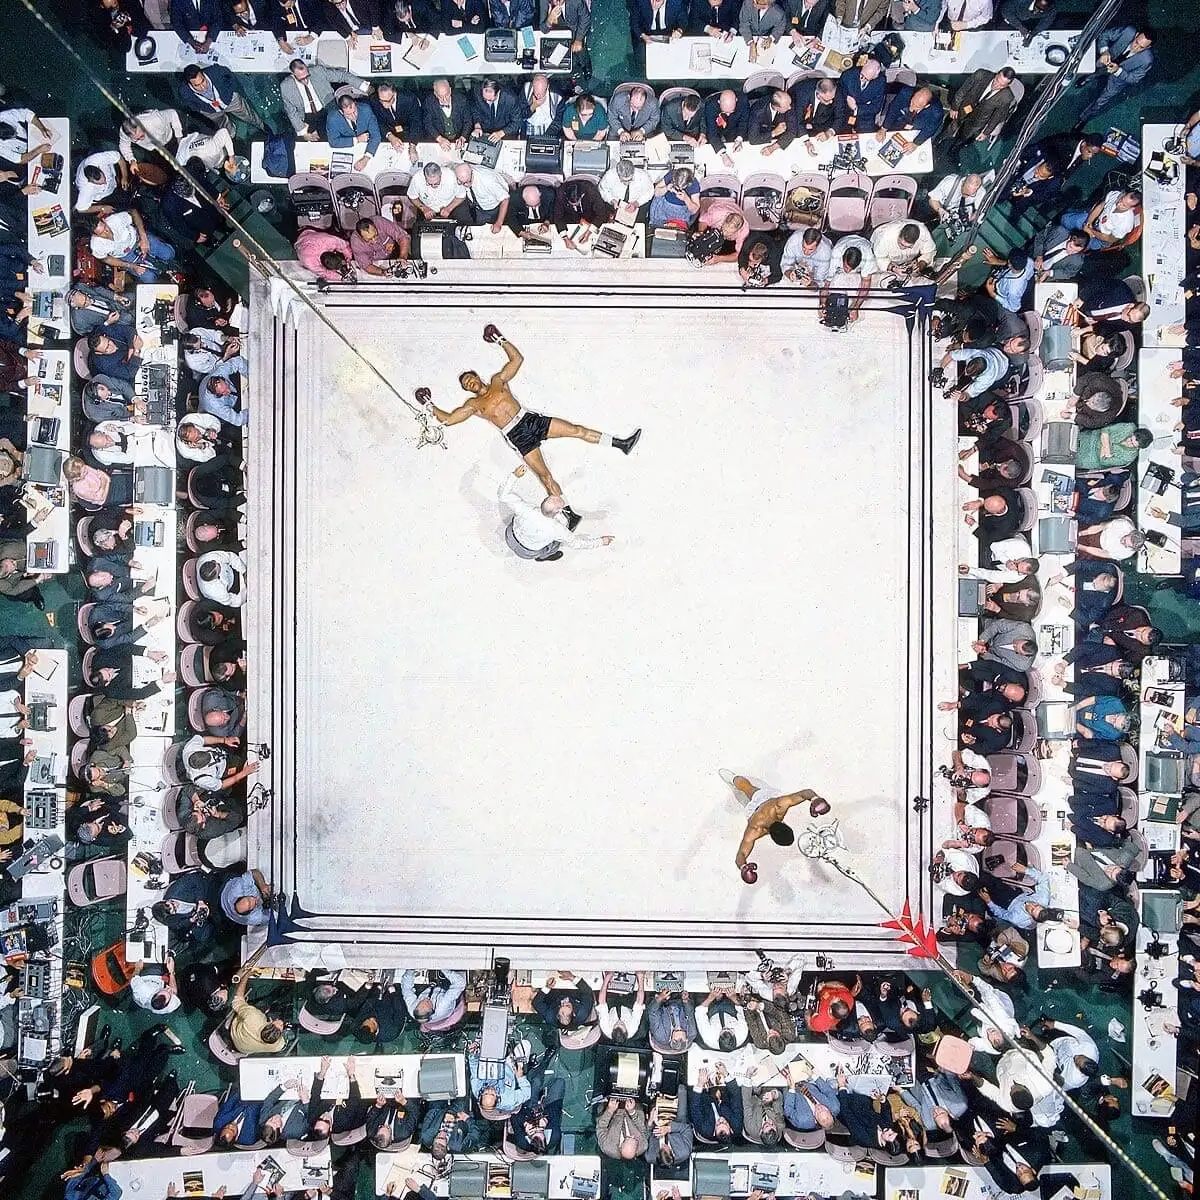 Great Sports Images - Muhammad Ali Stands Victorious After Knocking Out ‘Big Cat’ Williams - Neil Leifer